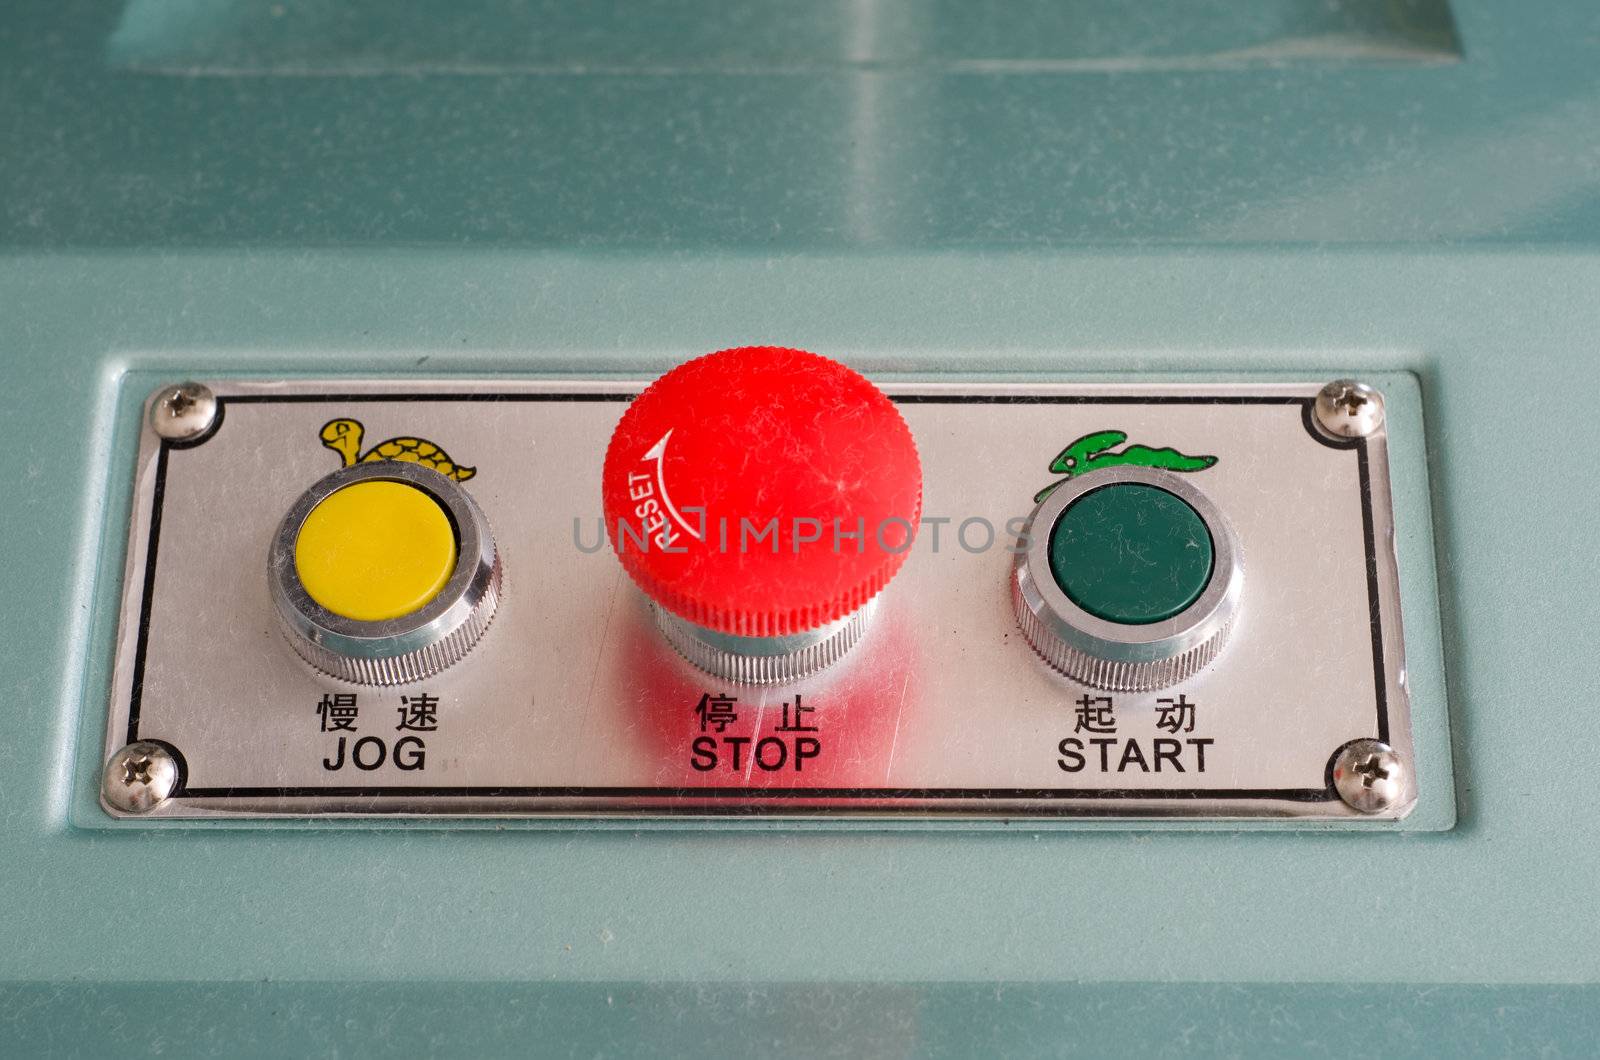 Industrial machine start stop and jog buttons in english and chinese letters